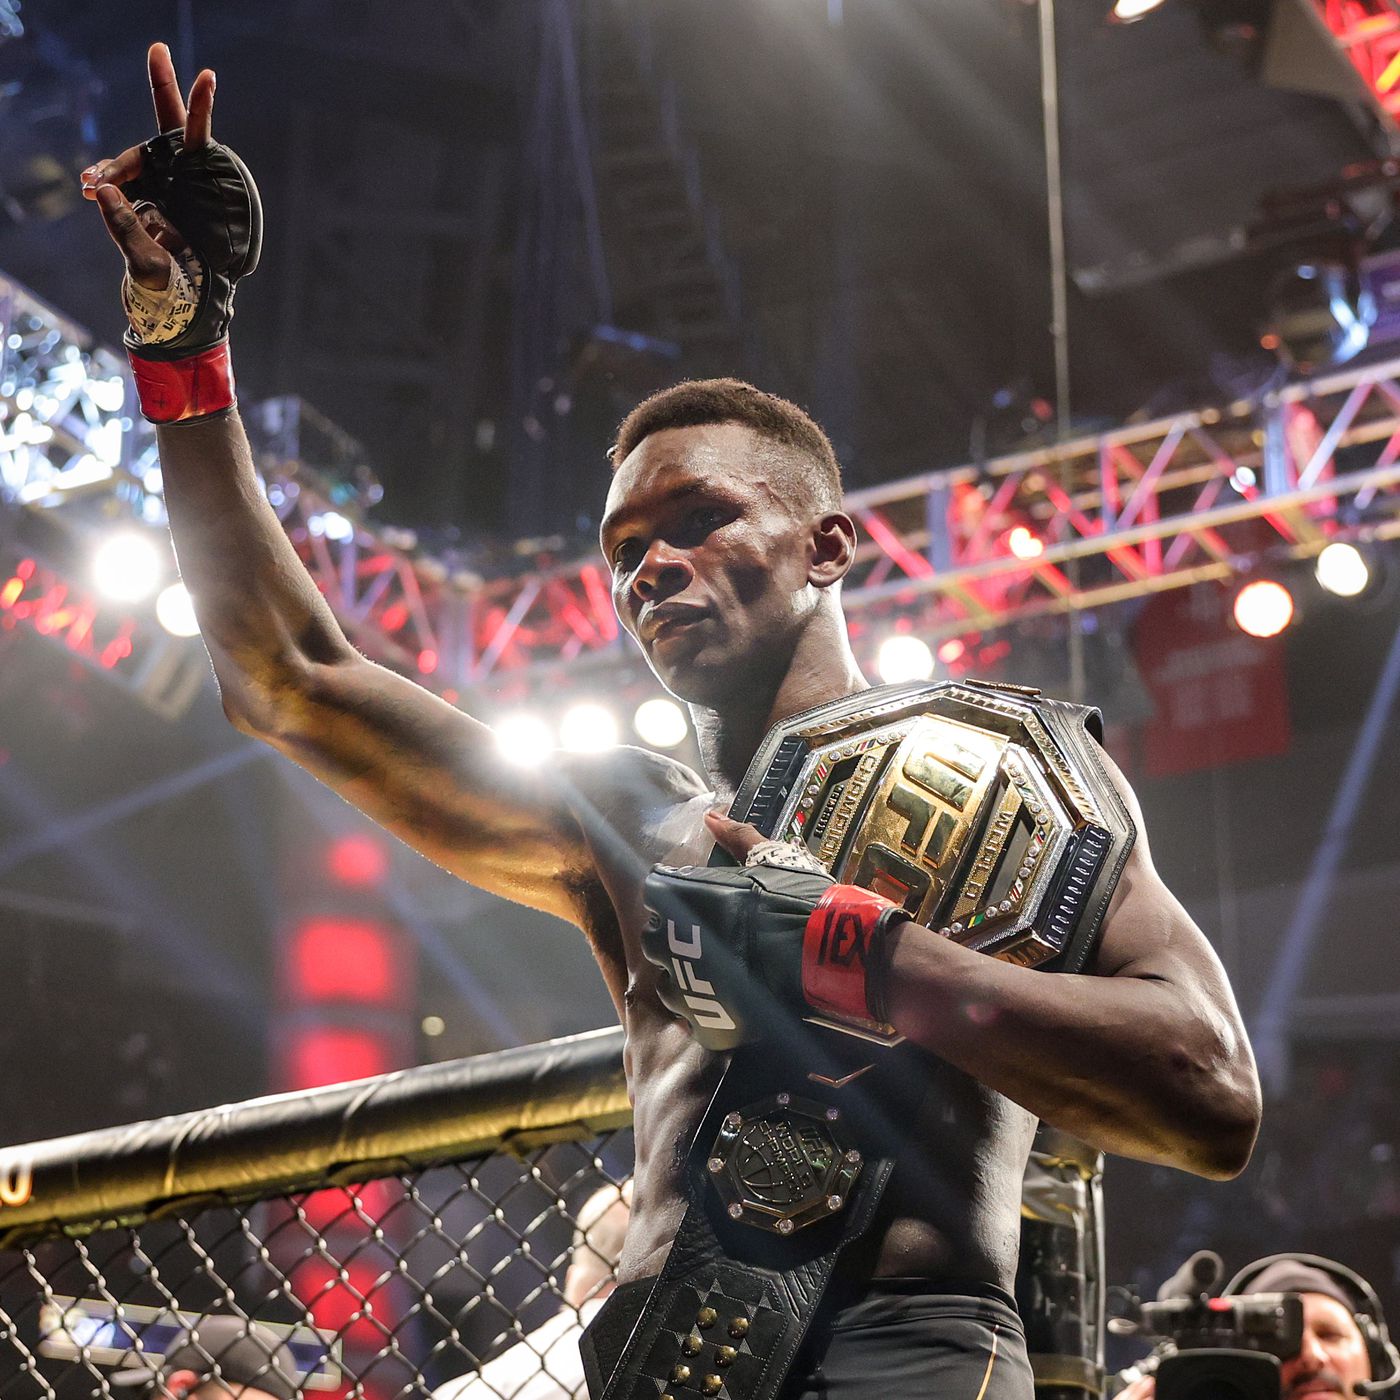 Morning Report: Israel Adesanya not interested fighting Khamzat Chimaev right now: 'Show me something' MMA Fighting